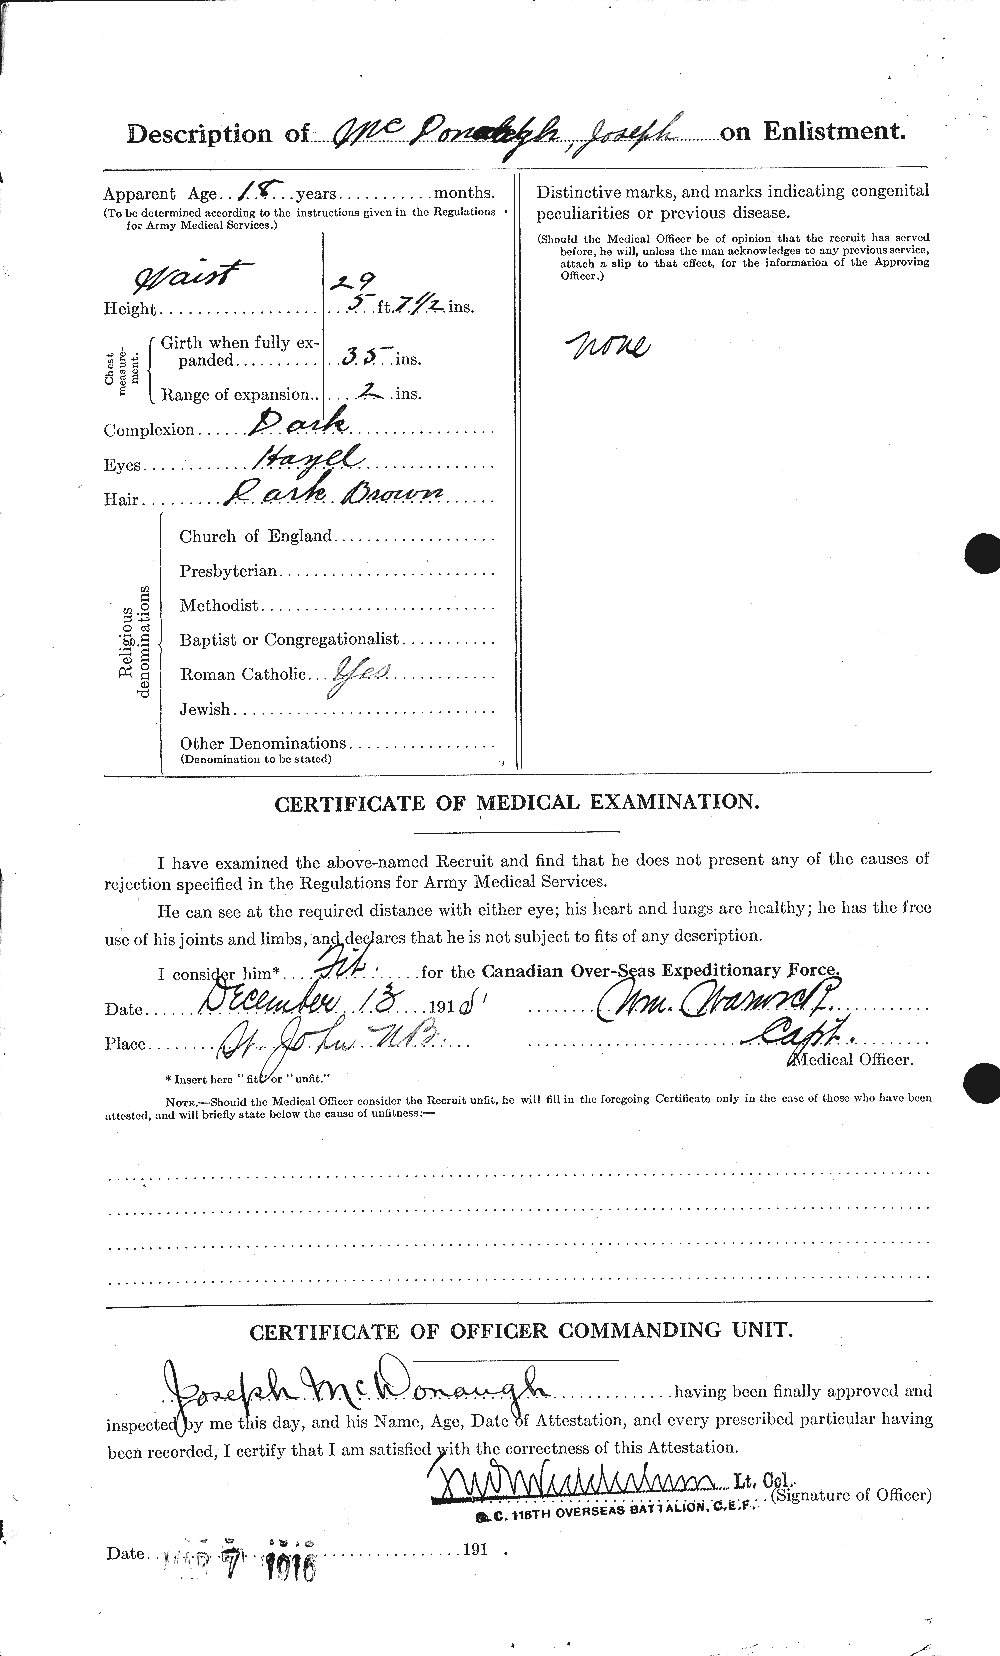 Personnel Records of the First World War - CEF 525123b